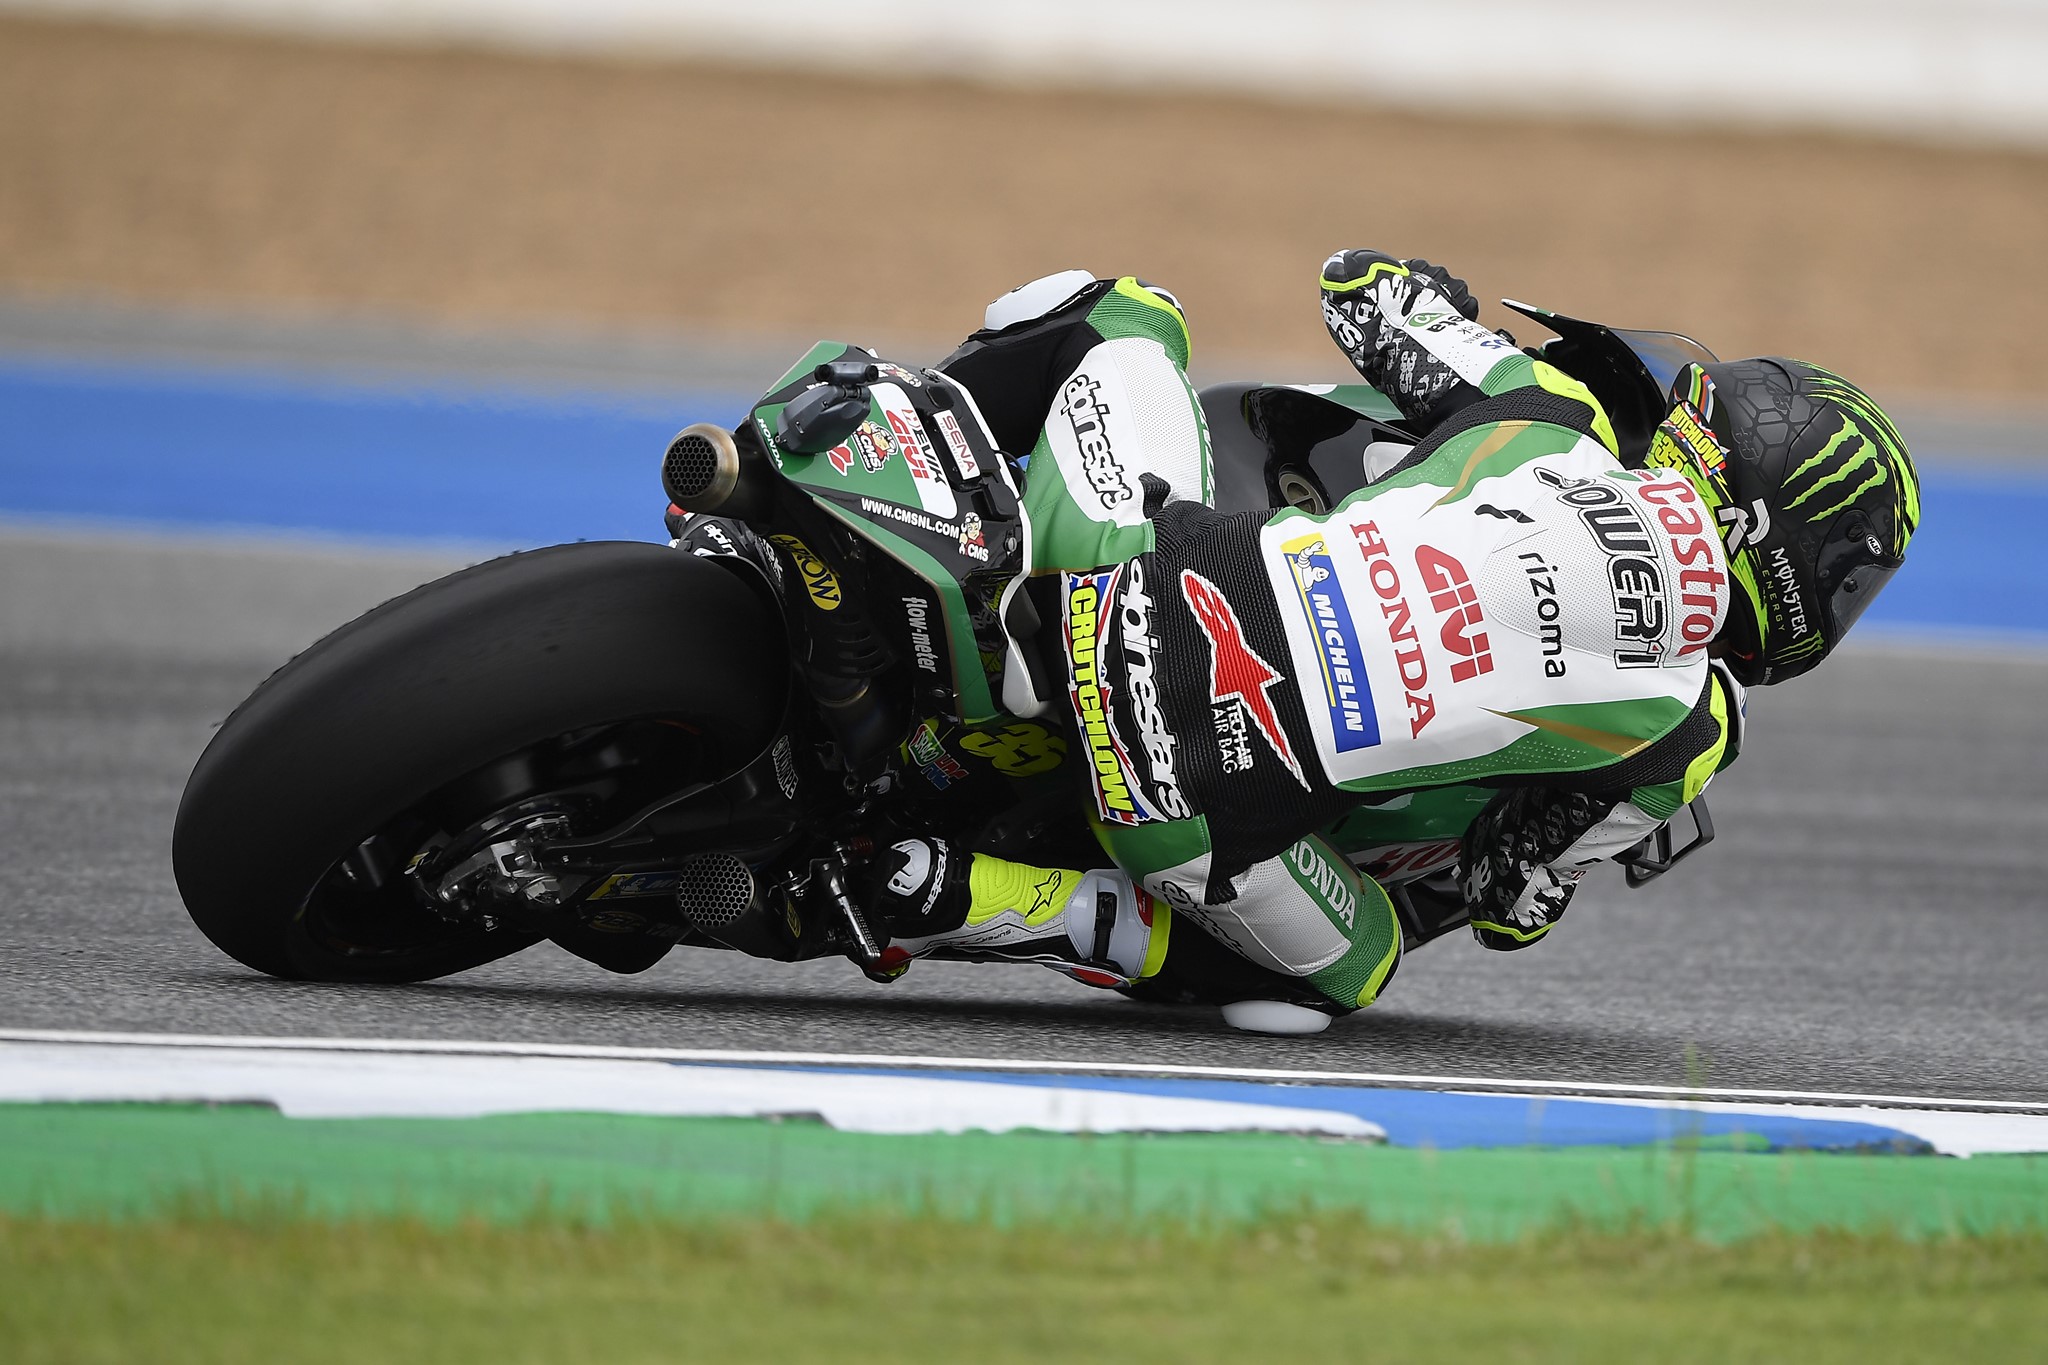 Crutchlow staying positive ahead of Thailand GP